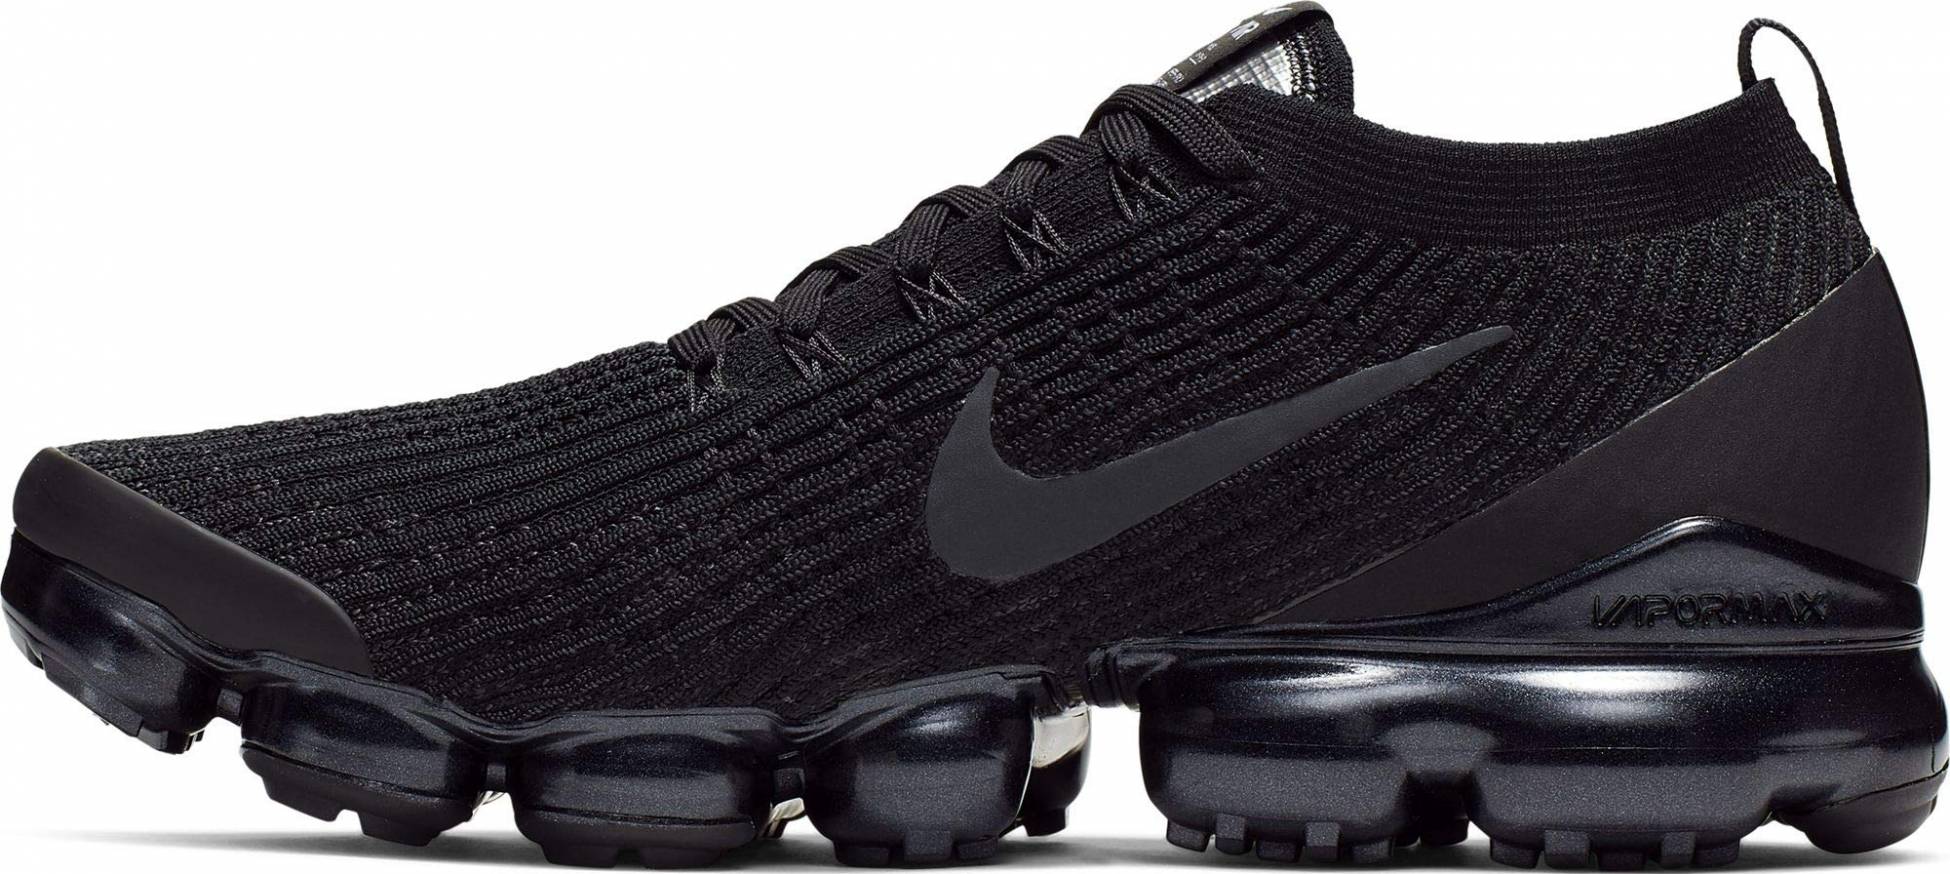 Nike Air Vapormax Flyknit 3 Review, Facts, Comparison | RunRepeat